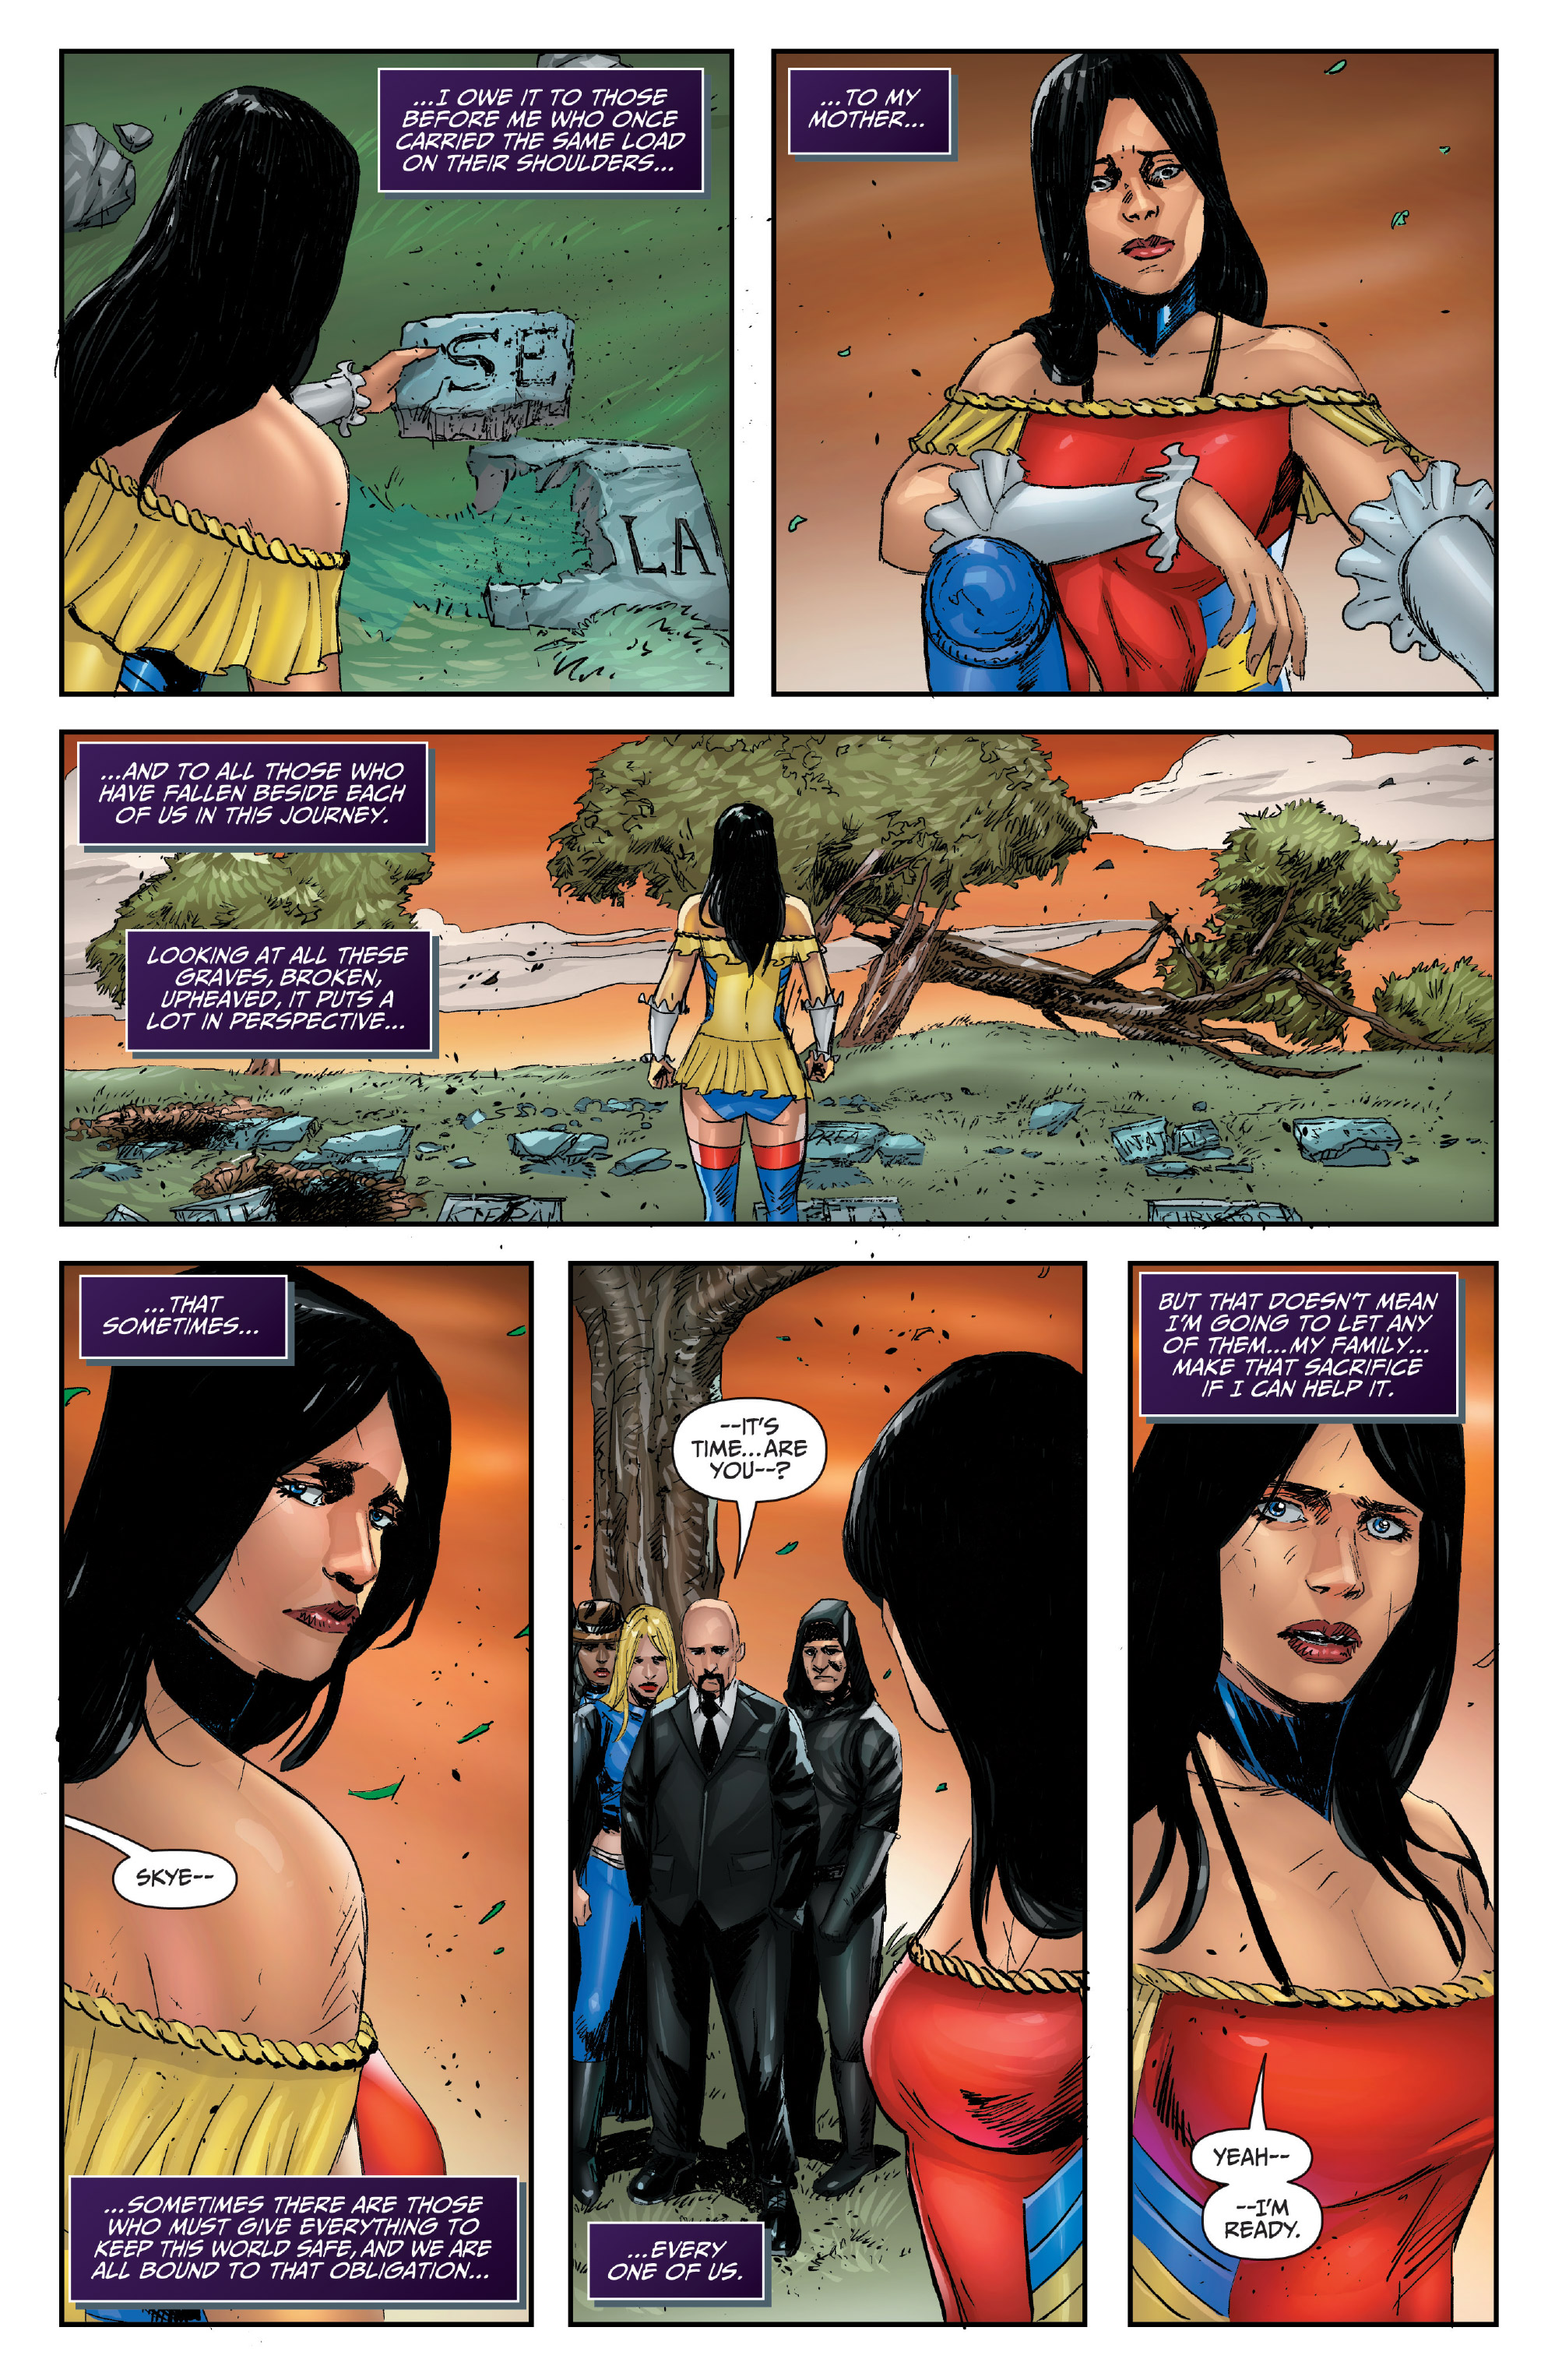 Grimm Fairy Tales (2016-): Chapter 68 - Page 4